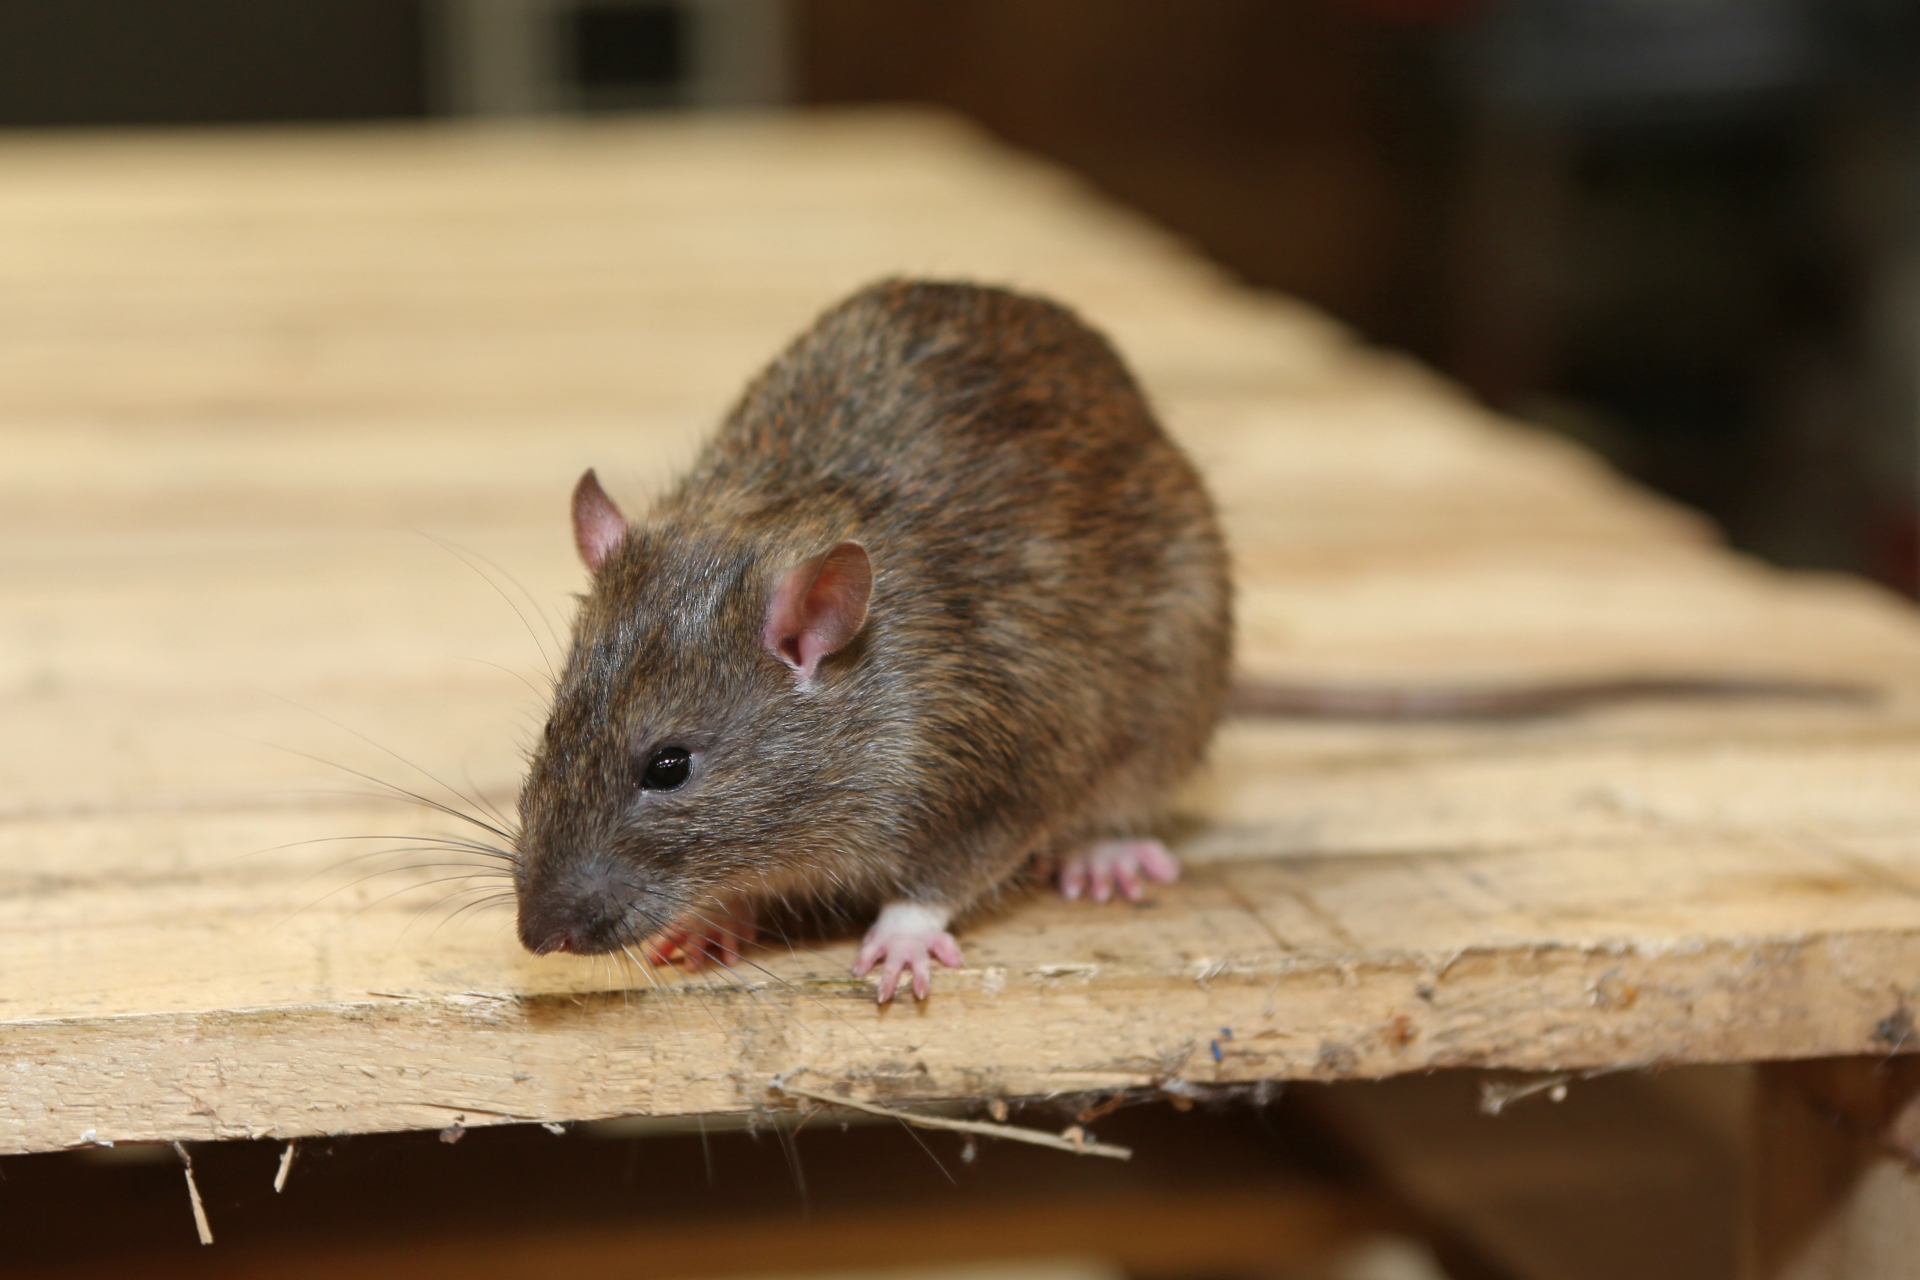 Rat extermination, Pest Control in Totteridge, Whetstone, N20. Call Now 020 8166 9746